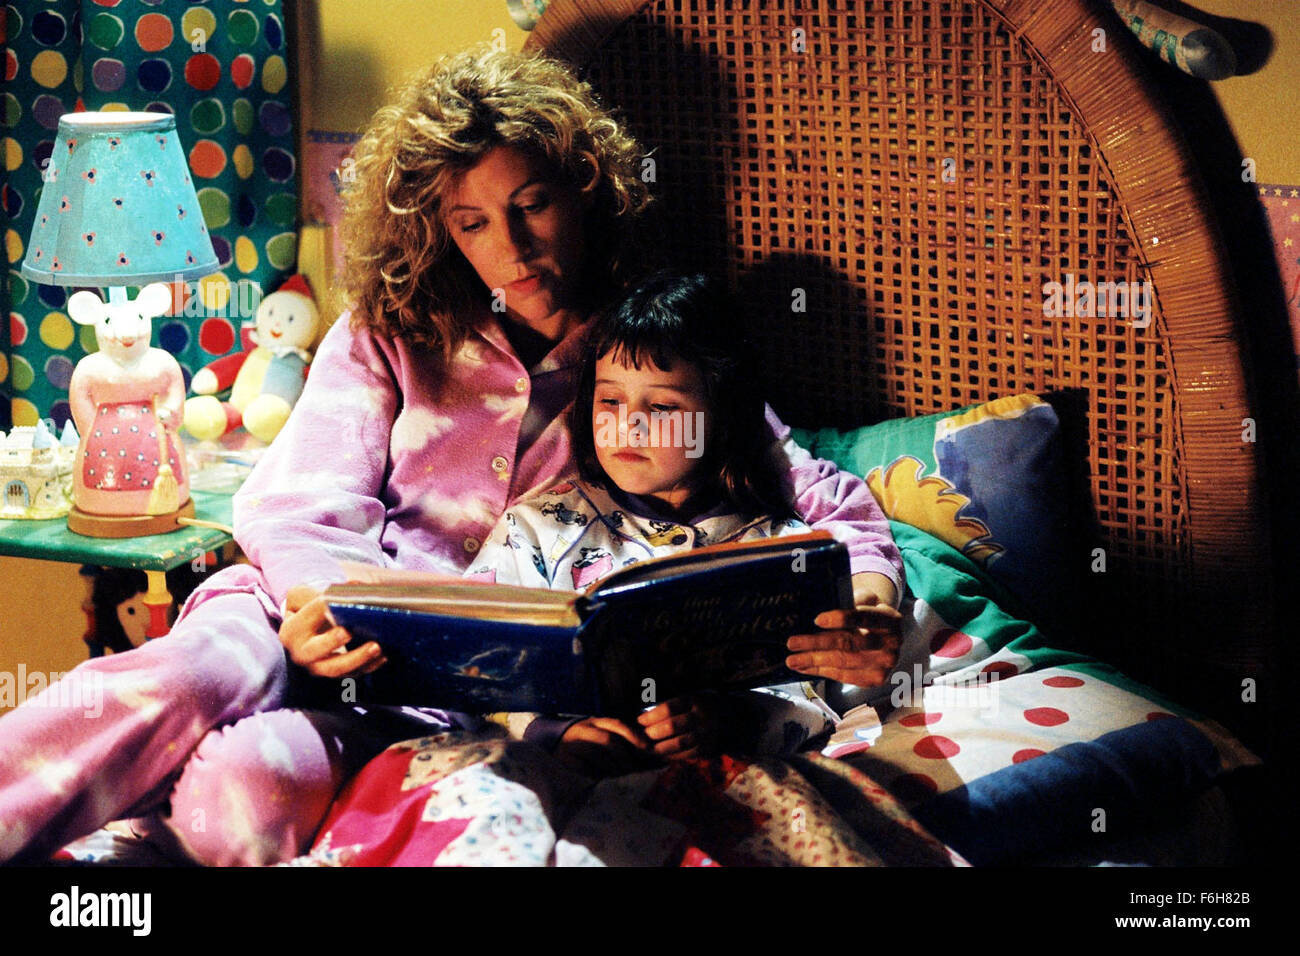 Apr 02, 2002; Montreal, Quebec, CANADA; SOPHIE LORAIN and EMILE CARRIER star as Alice Tremblay and her daughter in the family fantasy/comedy 'Alice's Odyssey - L'Odyssee d'Alice Tremblay' directed by Denise Filiatrault. Stock Photo